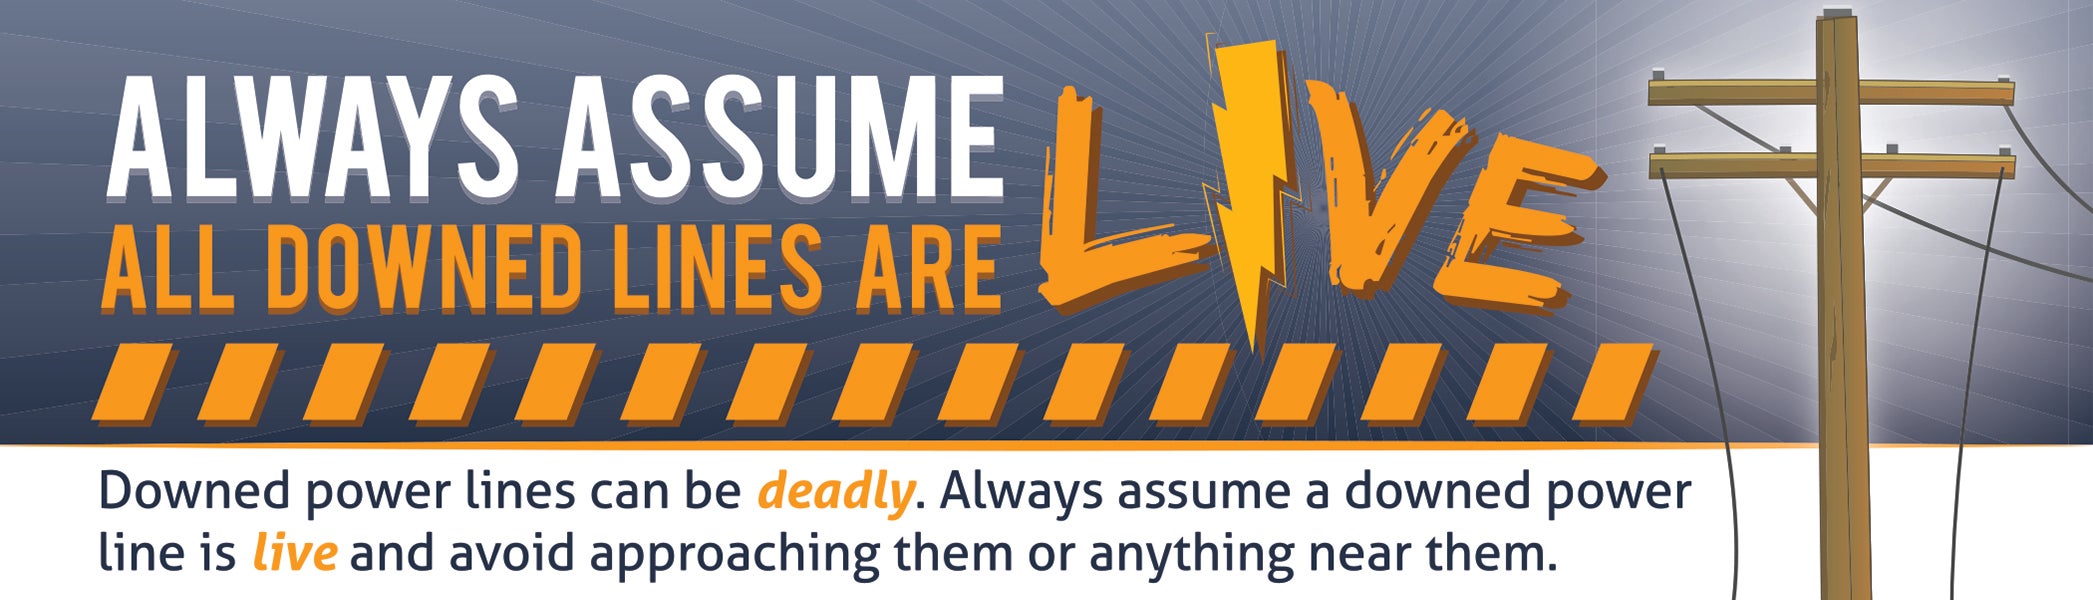 Downed Power Line Safety Information